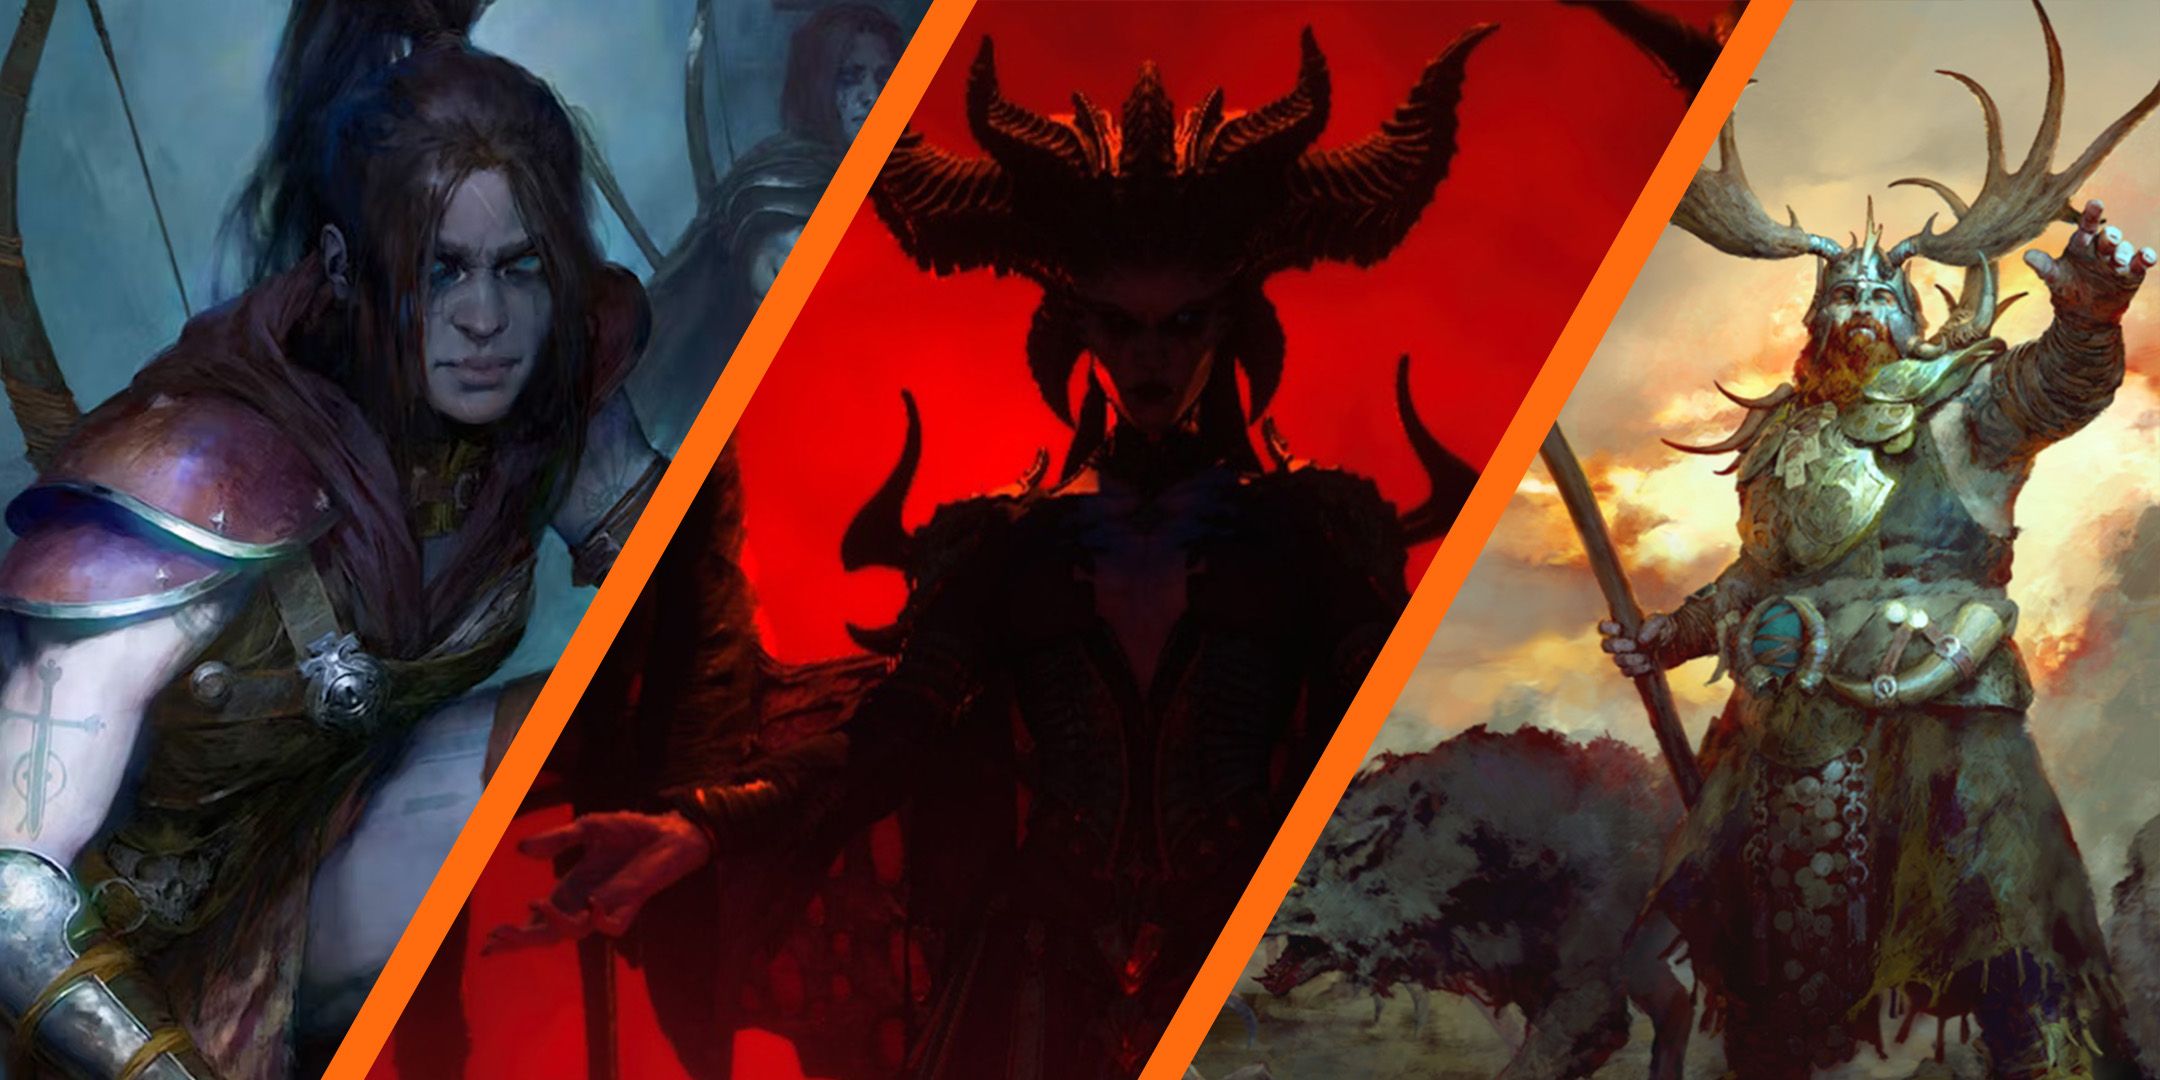 Diablo 4 Lilith on red background next to the Druid and Rogue characters